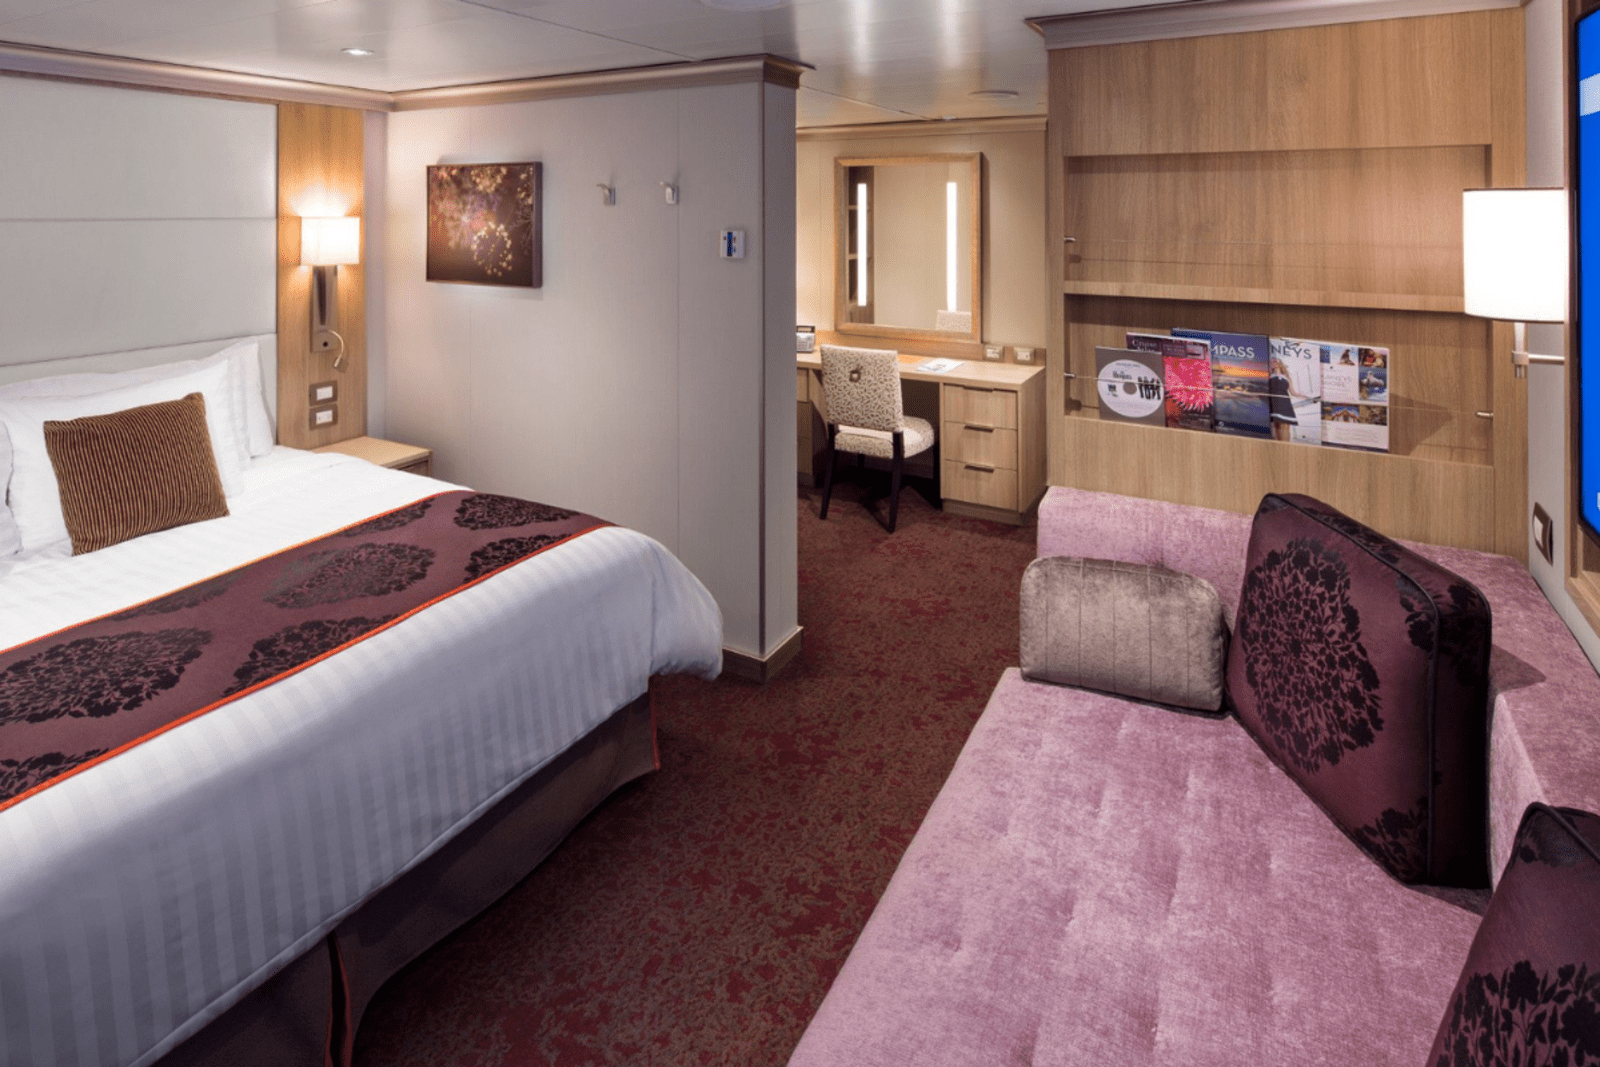 Interior view of an inside stateroom on a cruise ship